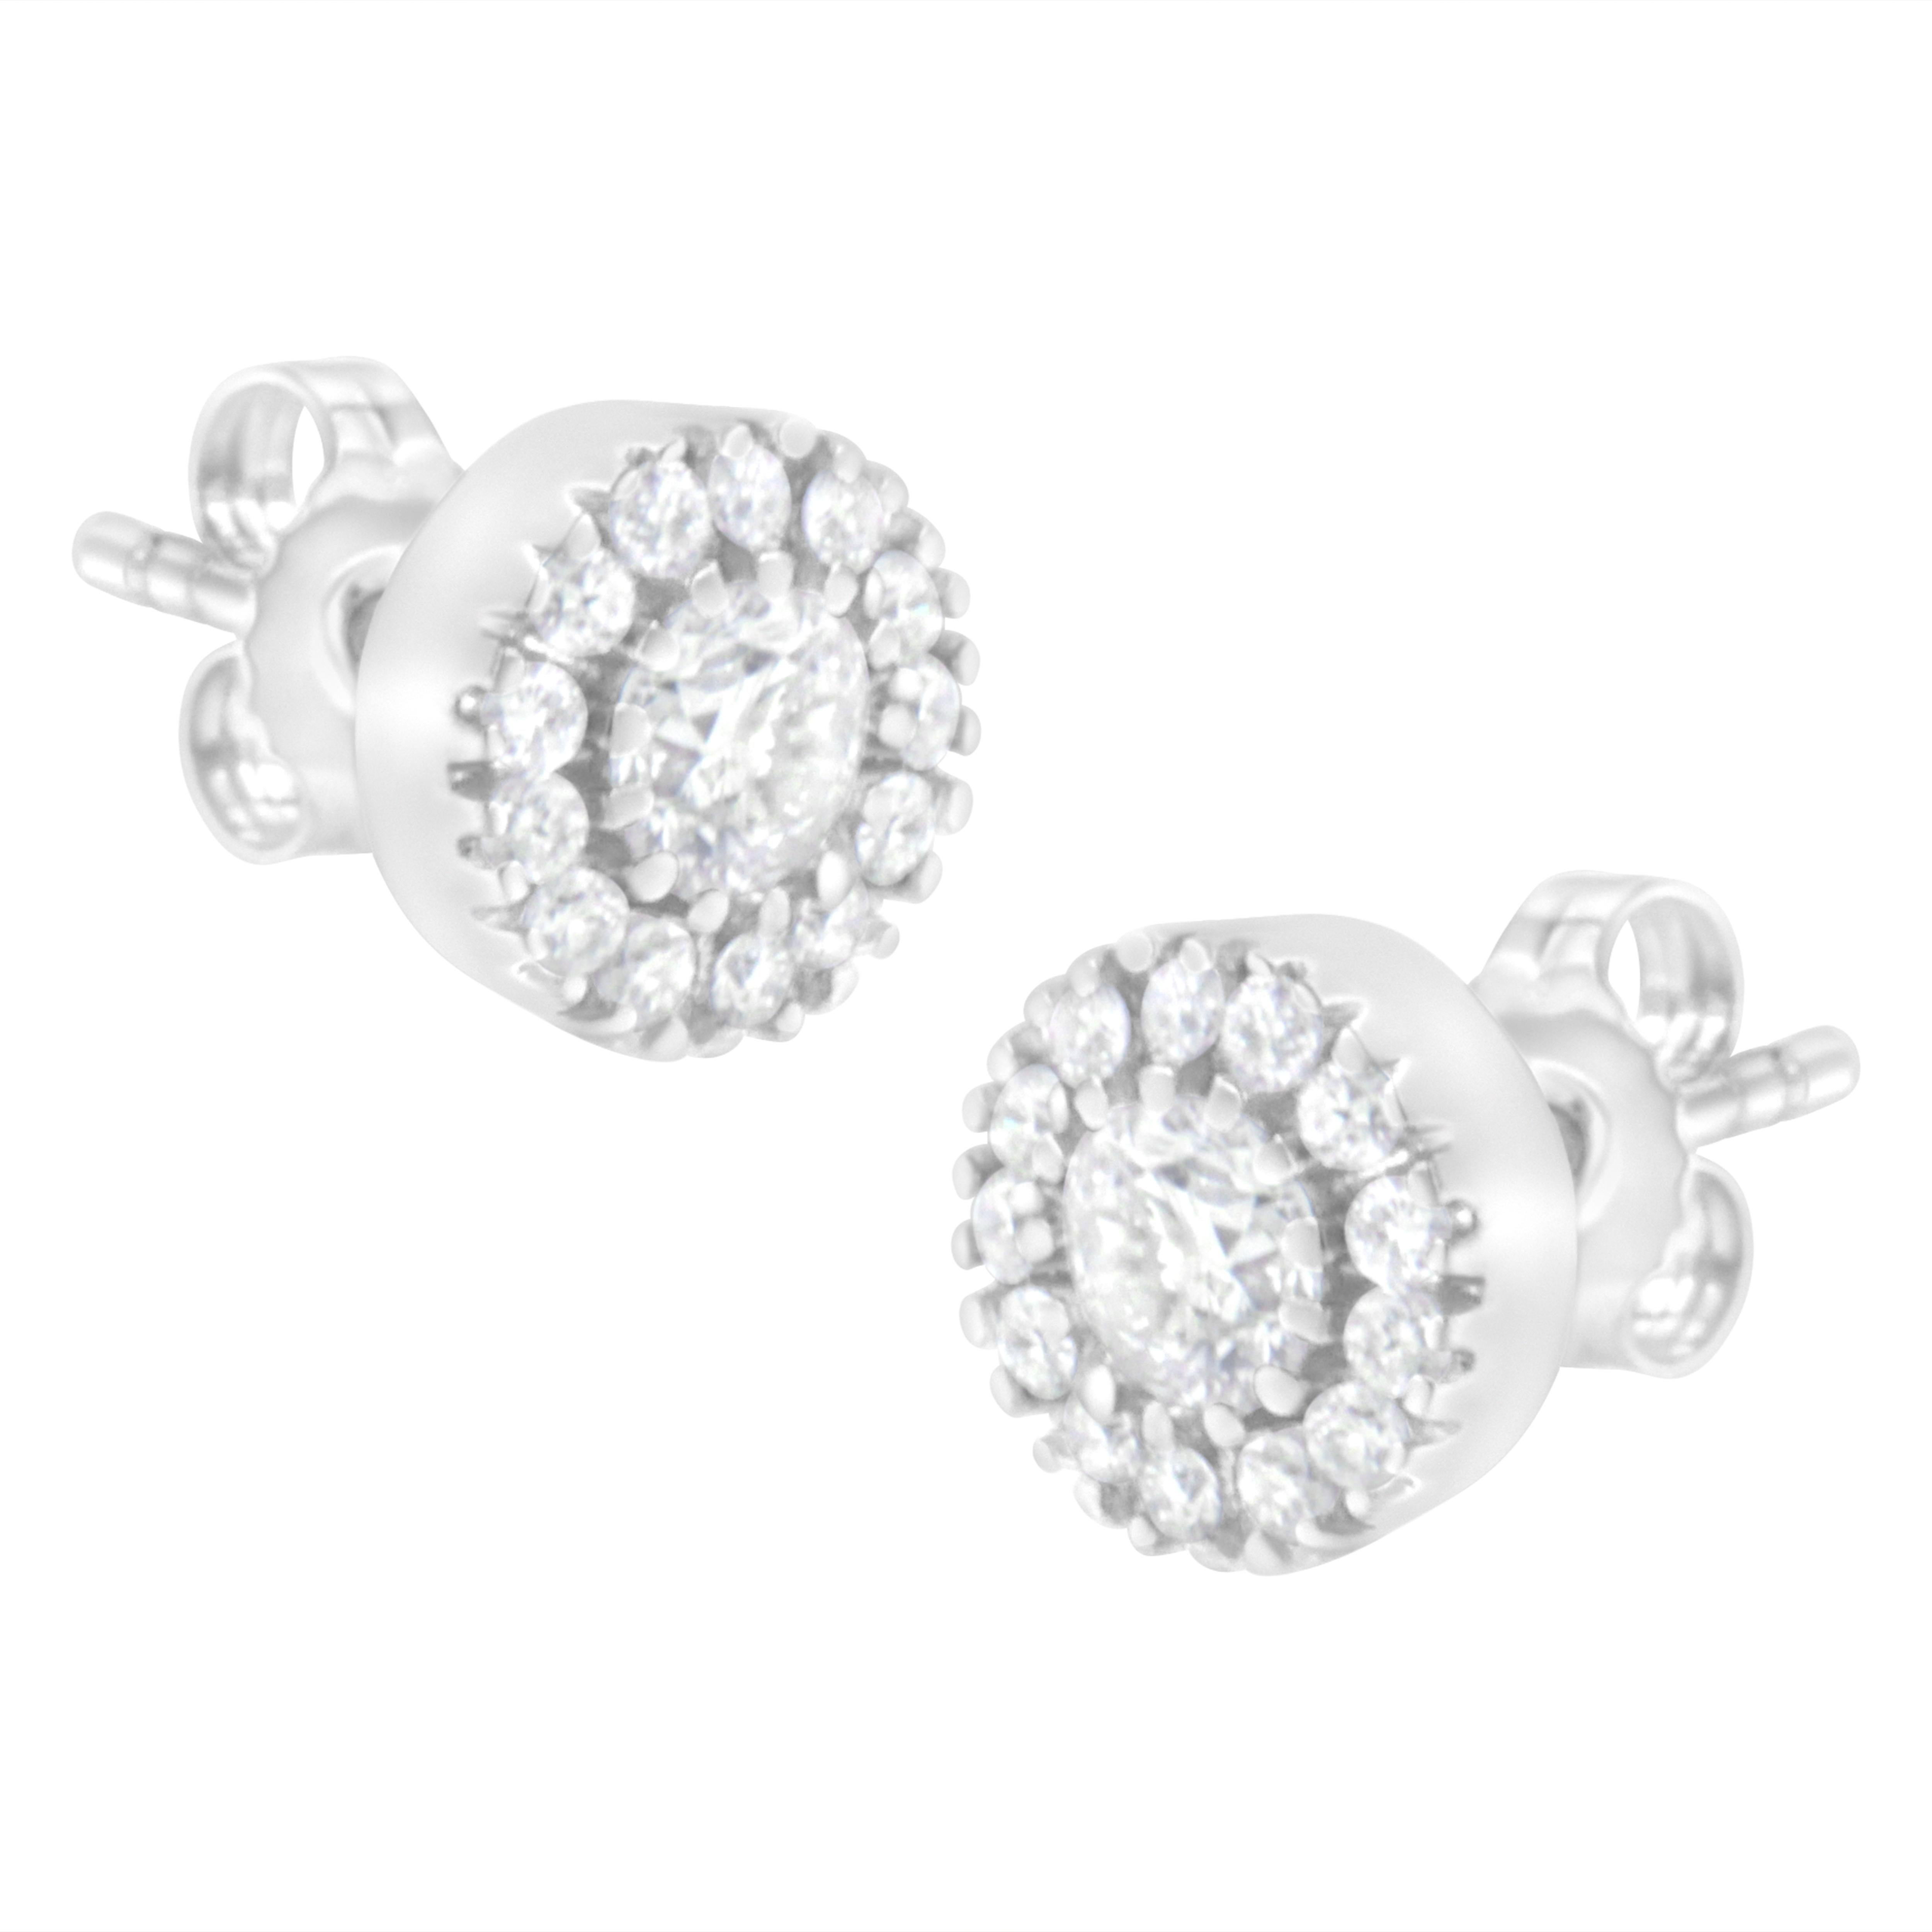 Time to make your appearance glow with this shimmering pair of 1 ct tdw stud earrings. The pair made with 14k white gold also features 2 central prong-set, round-cut diamonds and 26 smaller round-cut diamonds arranged in a pave setting. These